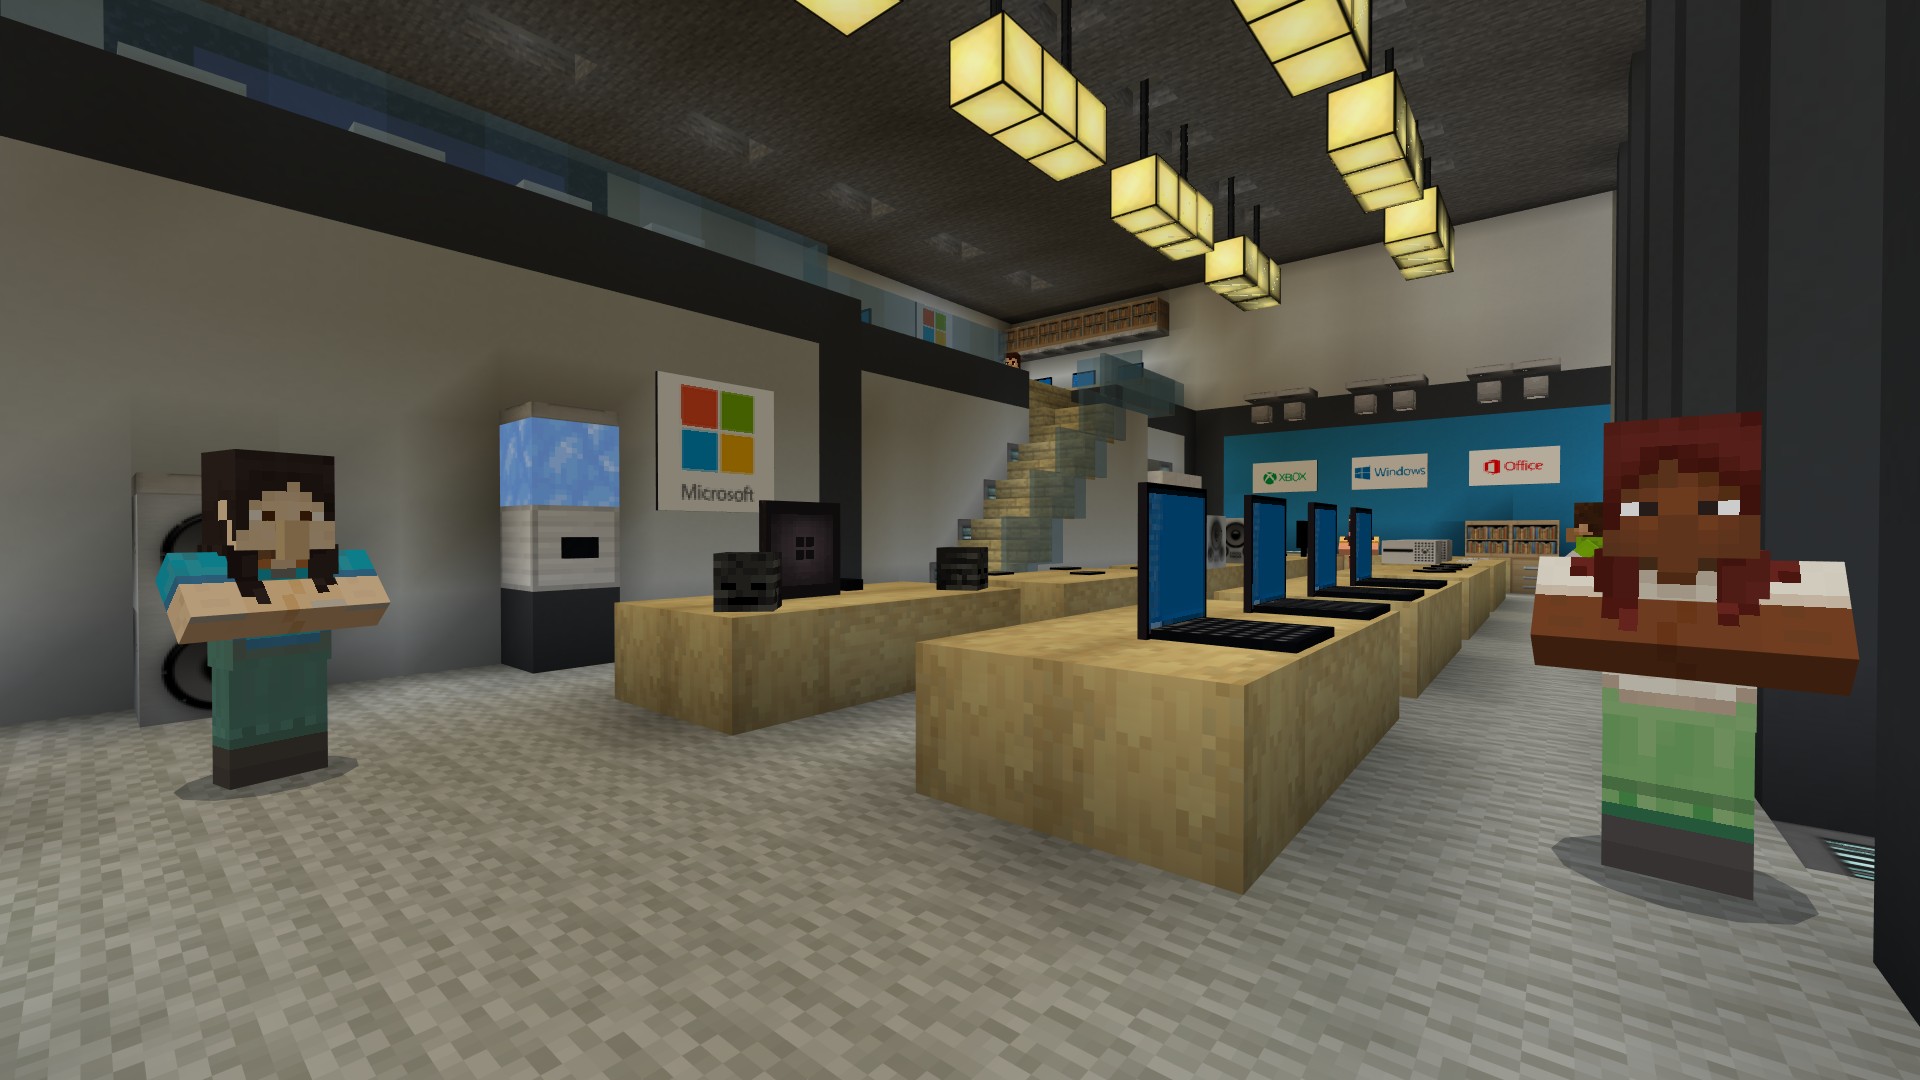 Two female NPCs face viewer to welcome them to Minecraft Offices re-created in Minecraft.